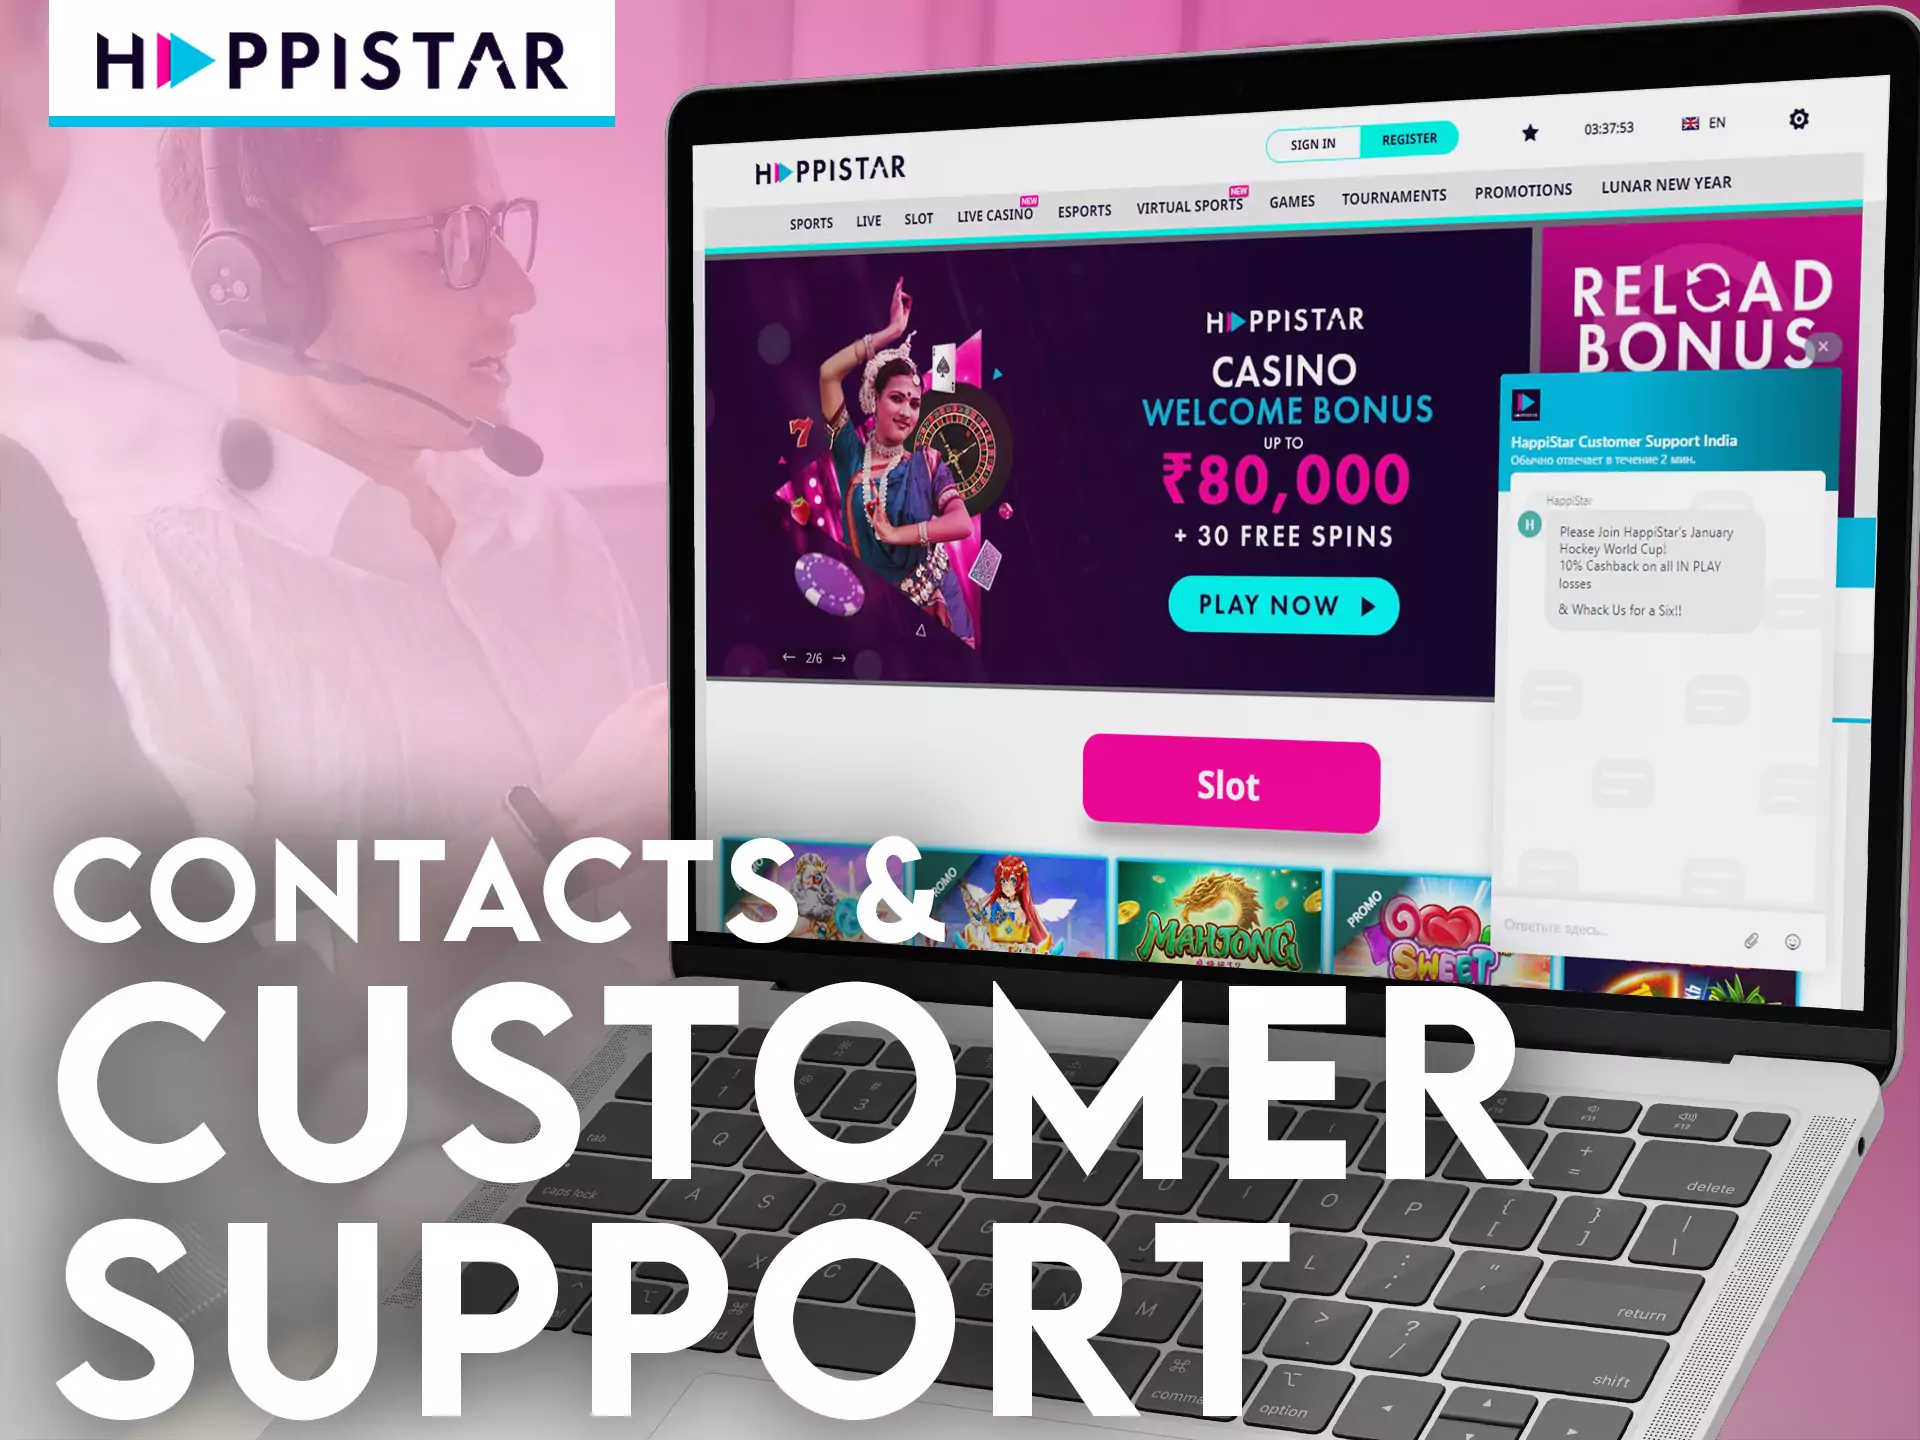 If you have questions about Happistar, ask a manager in the chat.